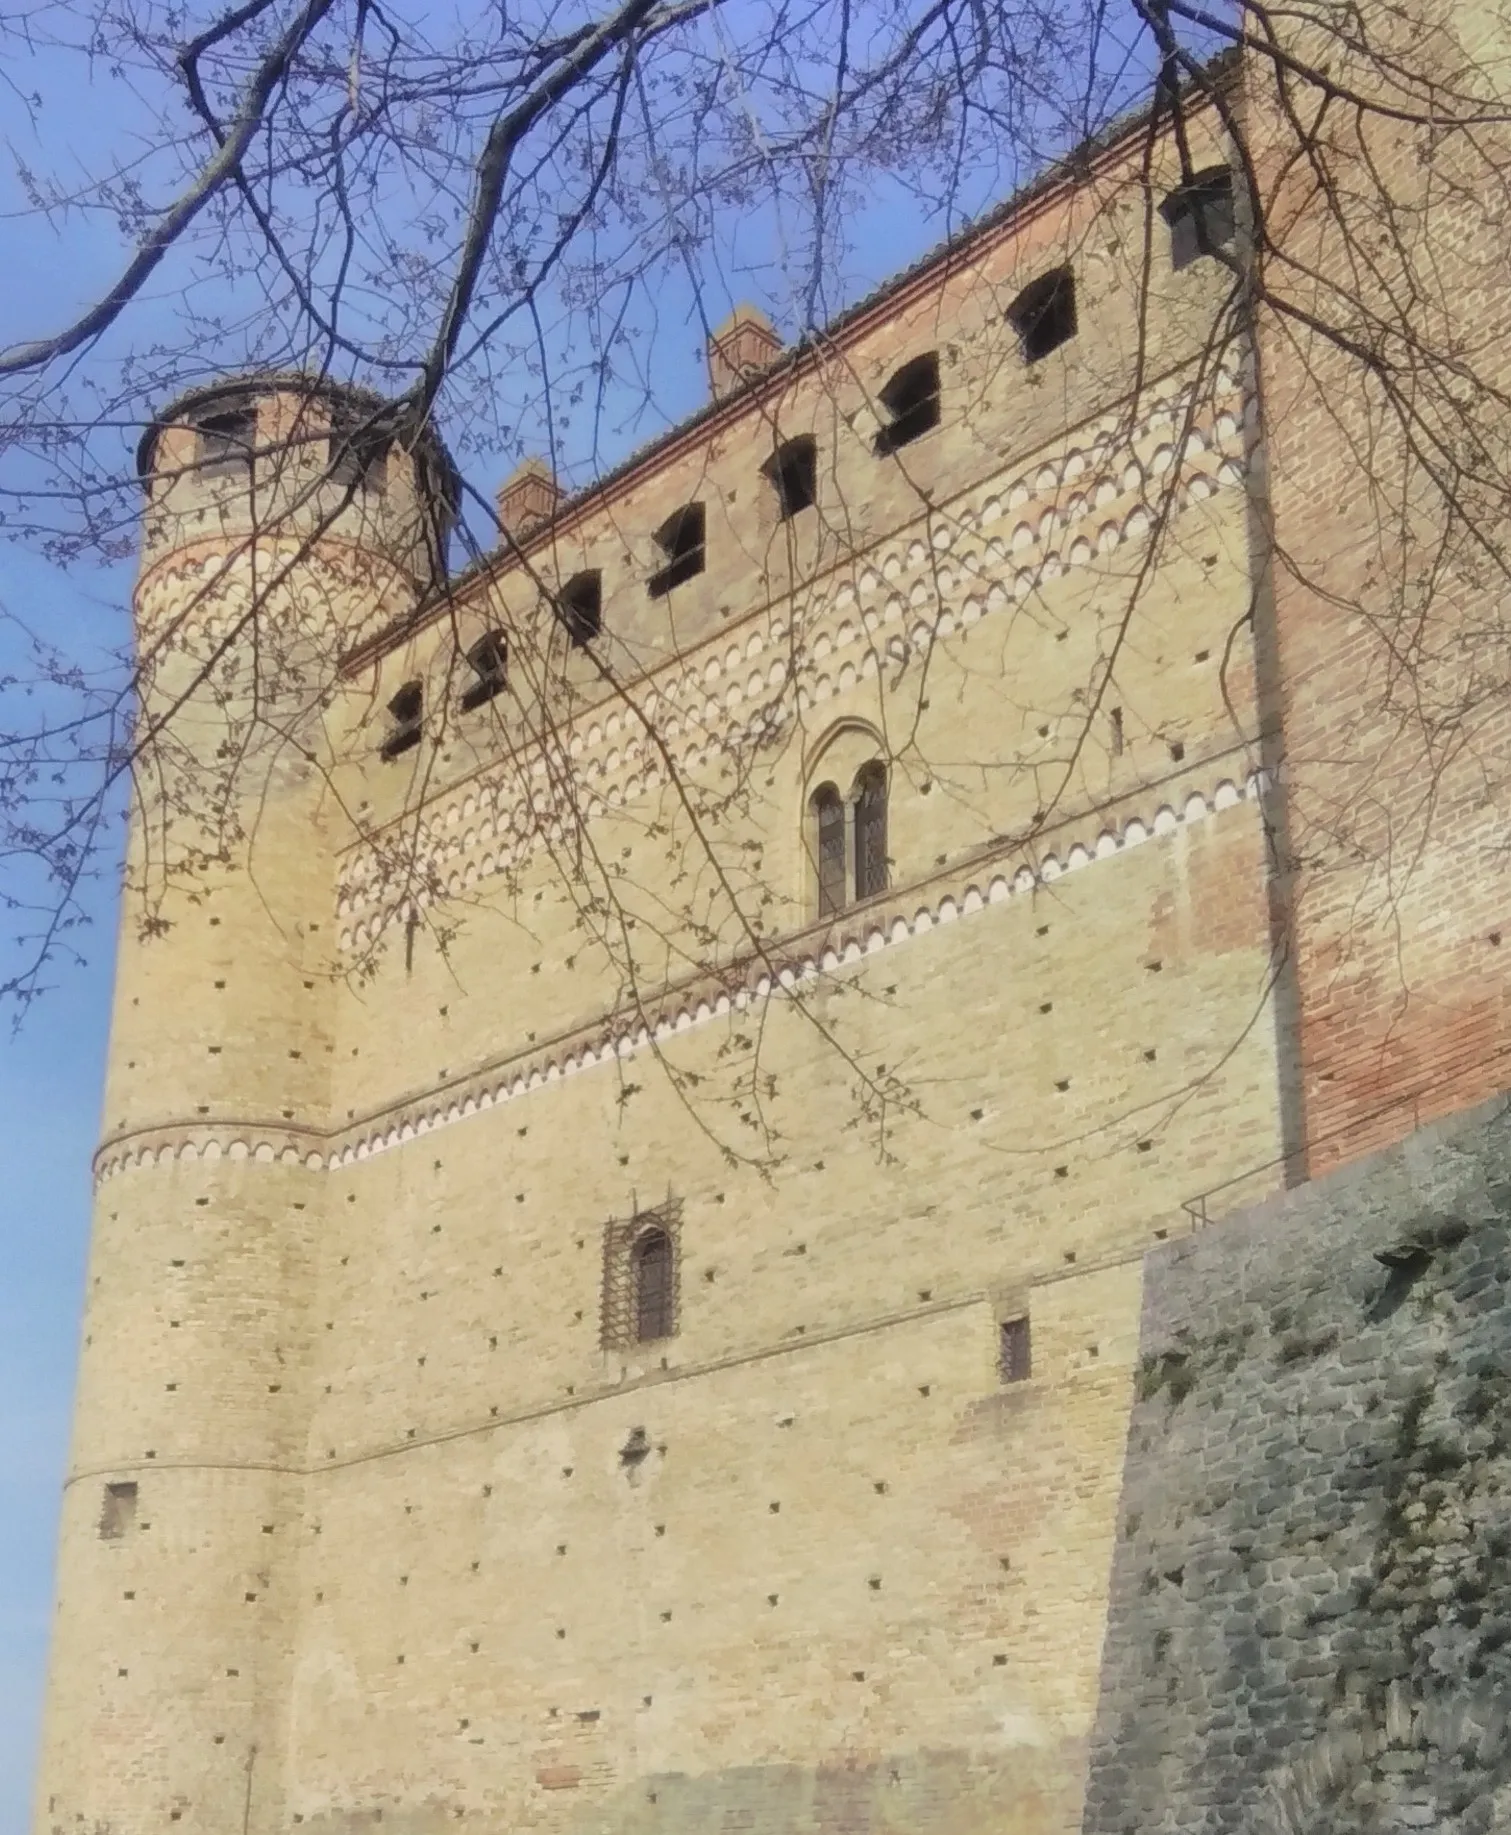 Photo showing: Cropped version of 14th century Serralunga d'Alba Castle in the Province of Cuneo, Piemonte. I cropped off the bottom and a bit of the top and sides.